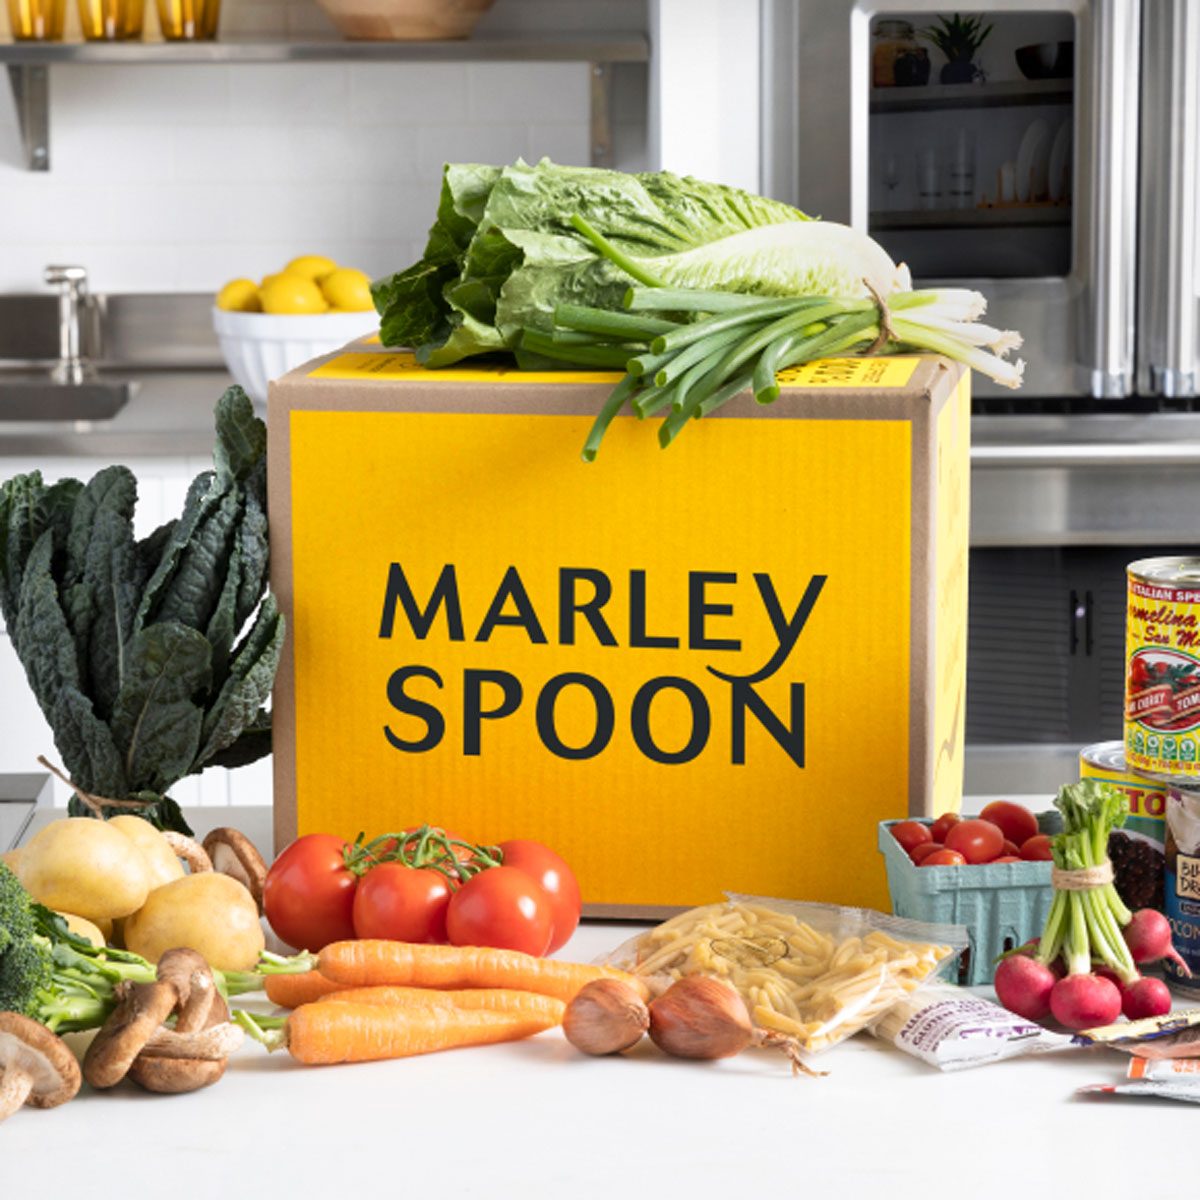 Marley Spoon Meal Delivery Service